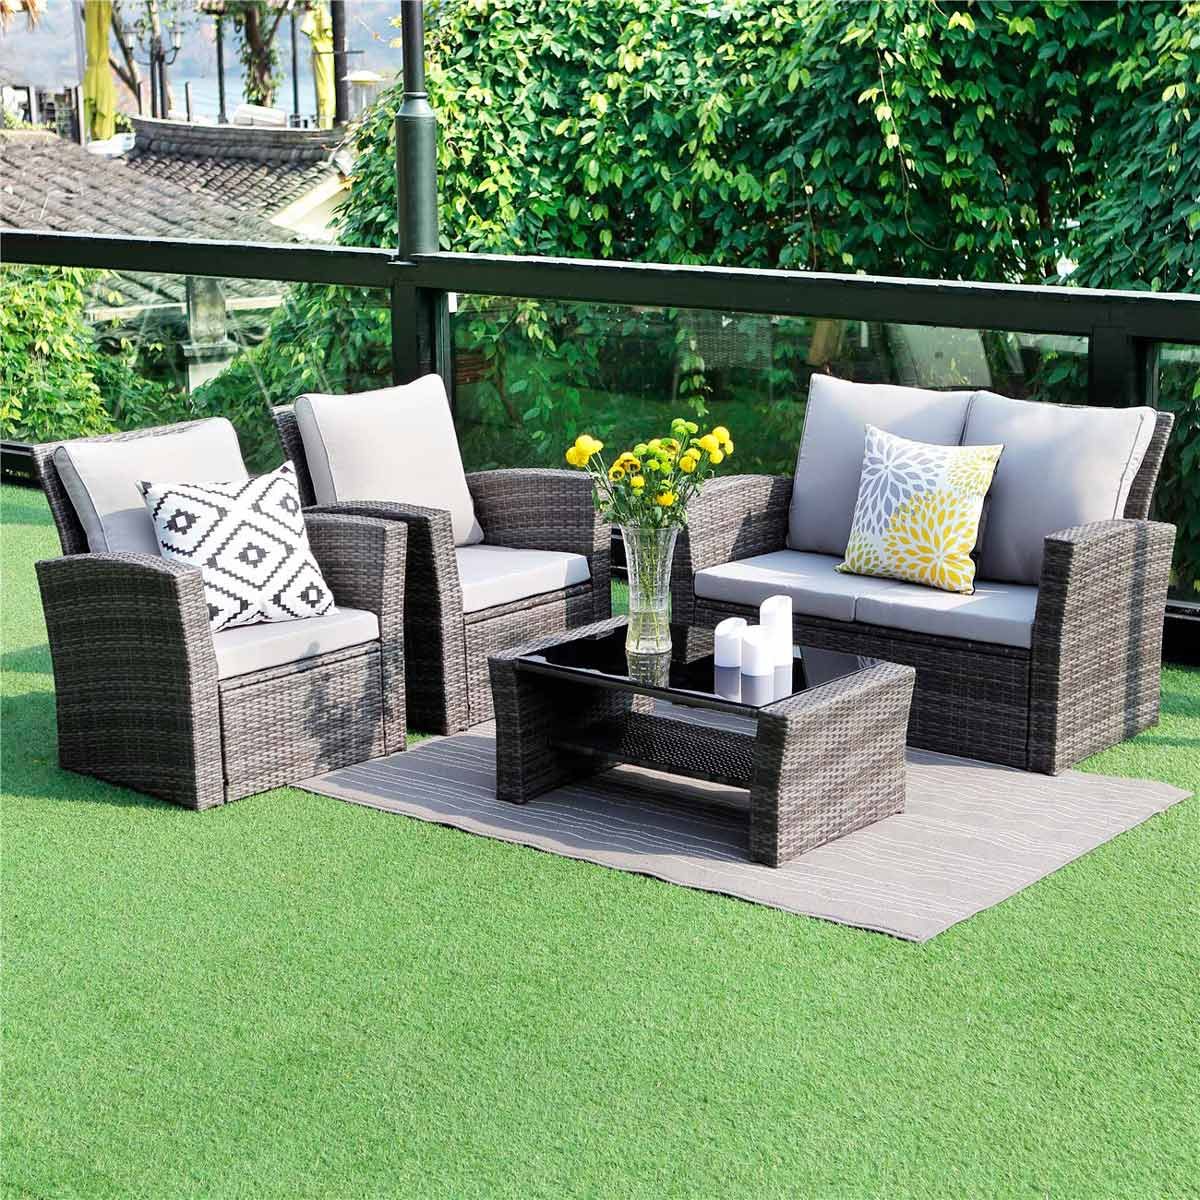 Amazon Patio Furniture We're Buying This Month! | Family Handyman